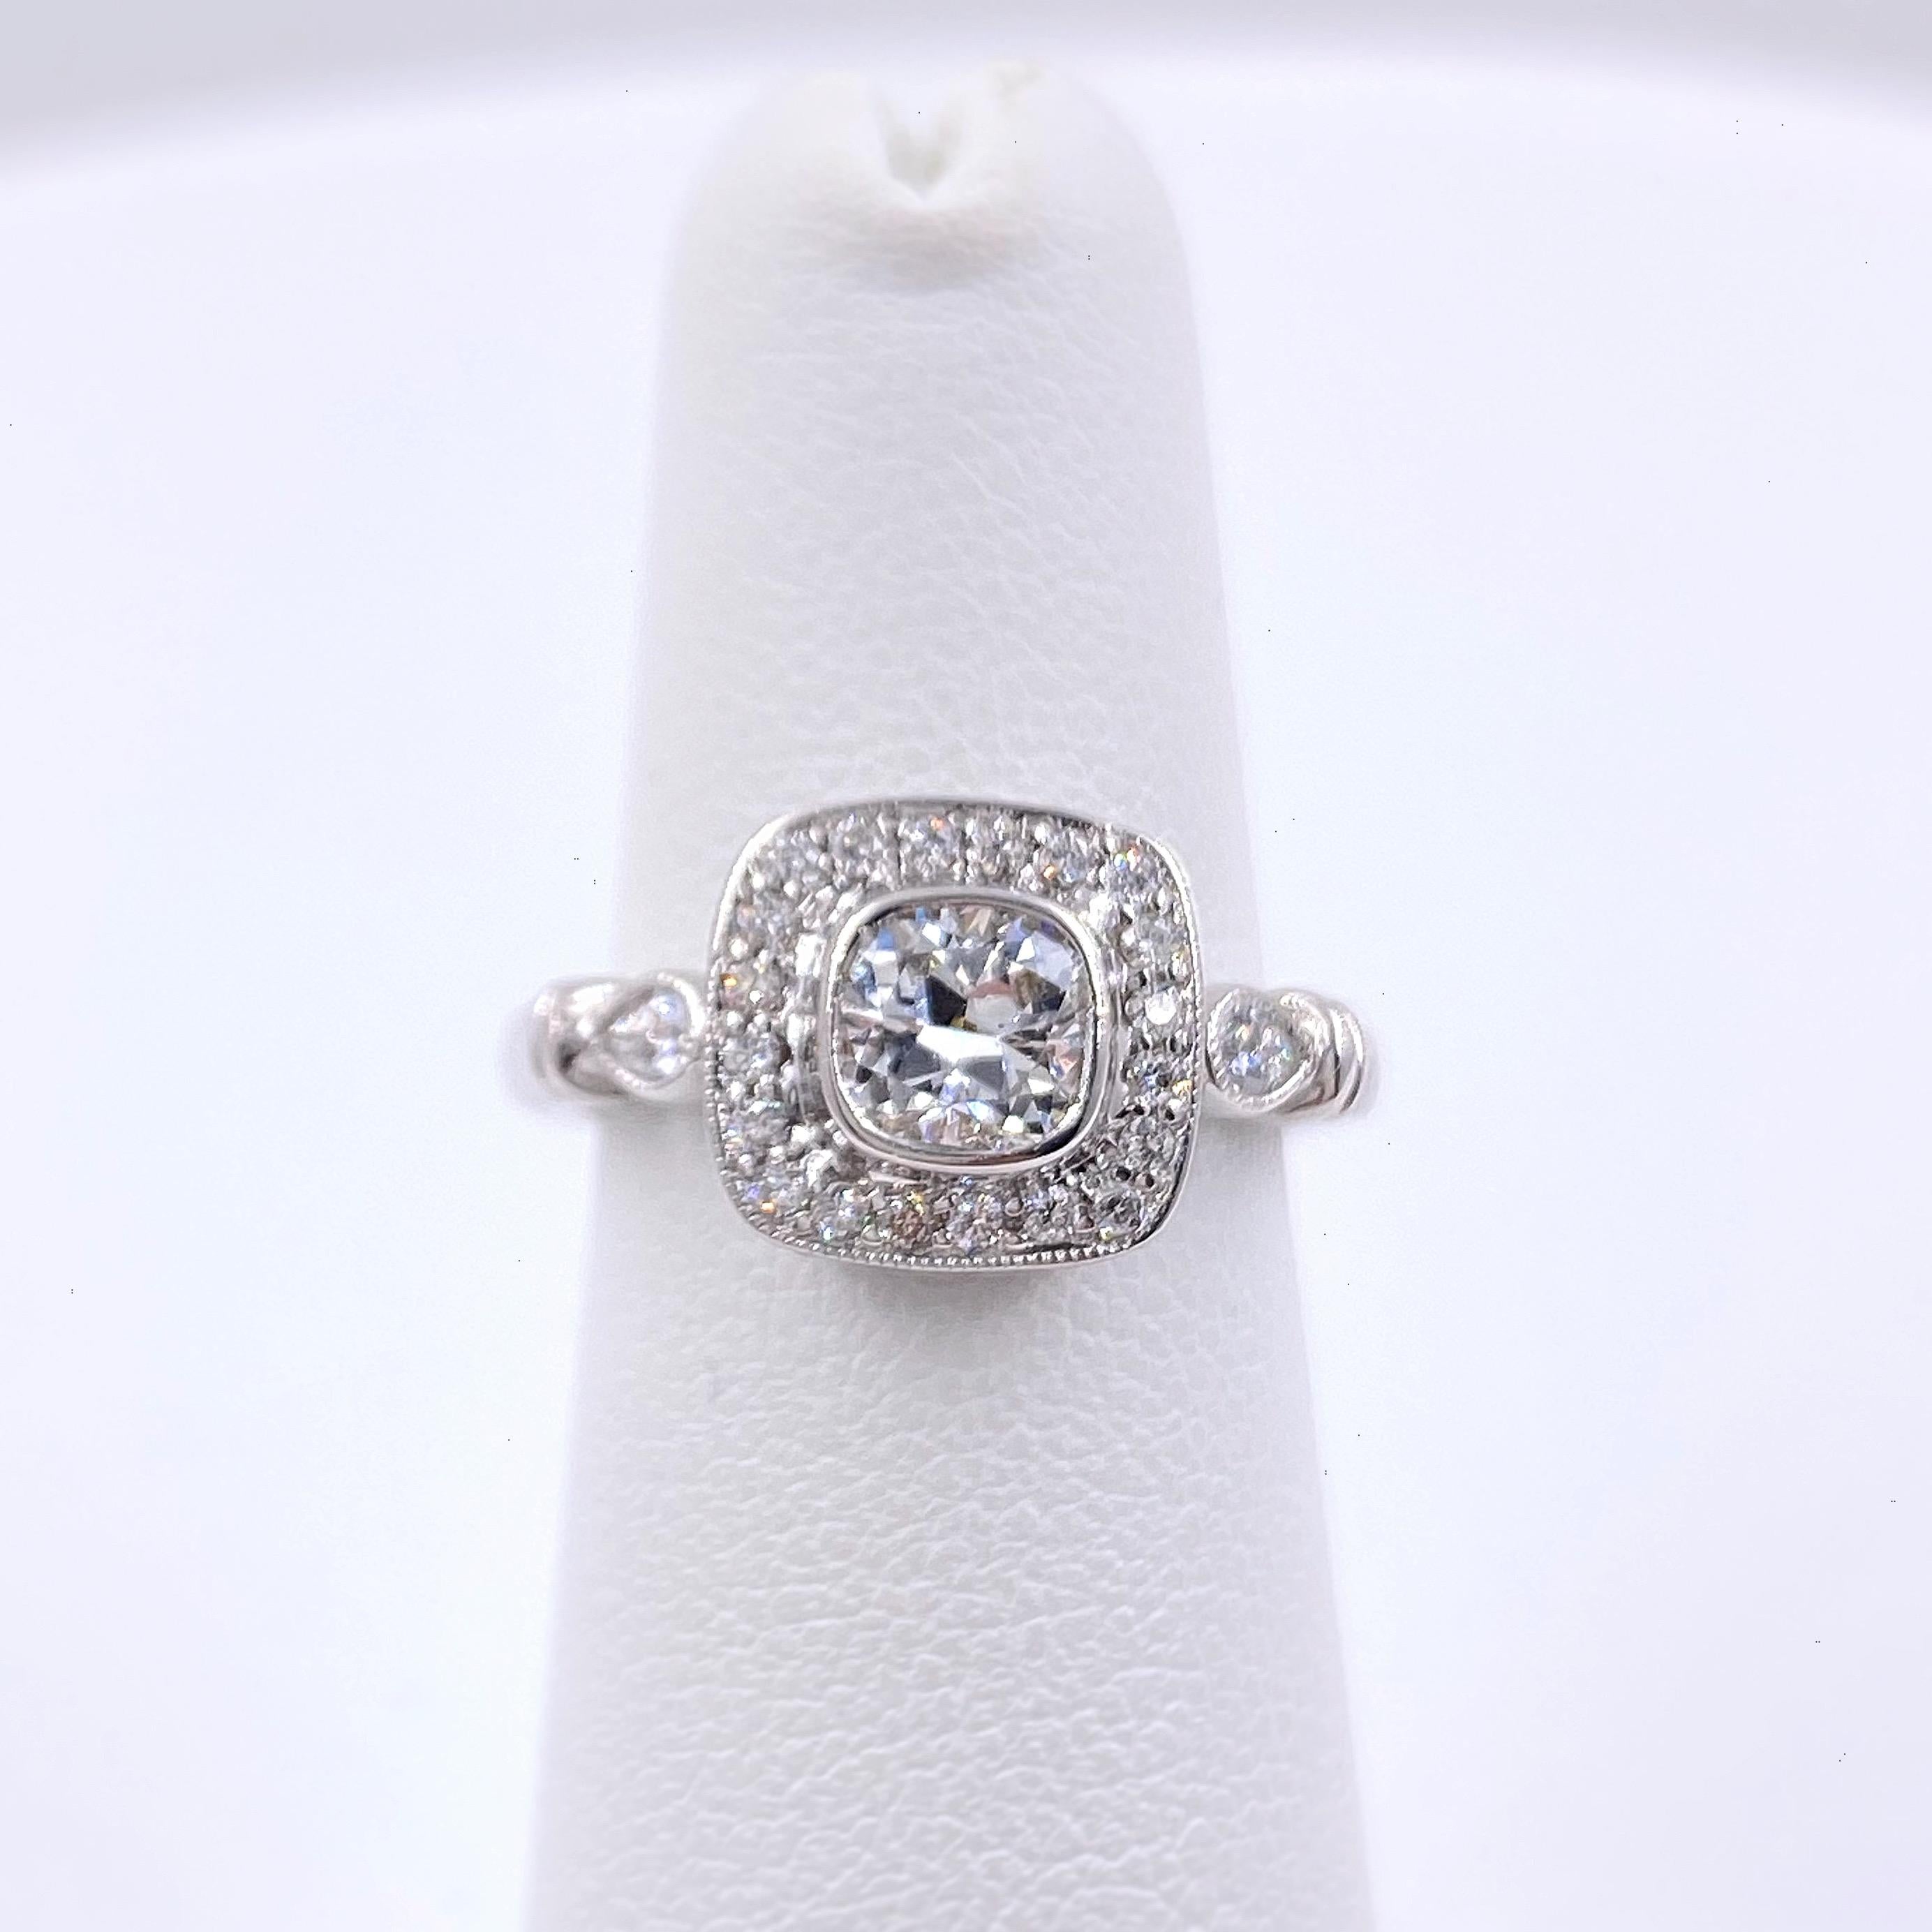 Diamond Engagement Ring
Style:  Bezel Set with Halo Ring
Metal:  18kt White Gold
Size:  6 - sizable
TCW:  1.20 tcw
Main Diamond:  Cushion Diamond 0.70 cts
Color & Clarity:  G - VS2
Accent Diamonds:  38 Round Brilliant Cut 0.40 tcw  G-H VS2-SI1 & 2